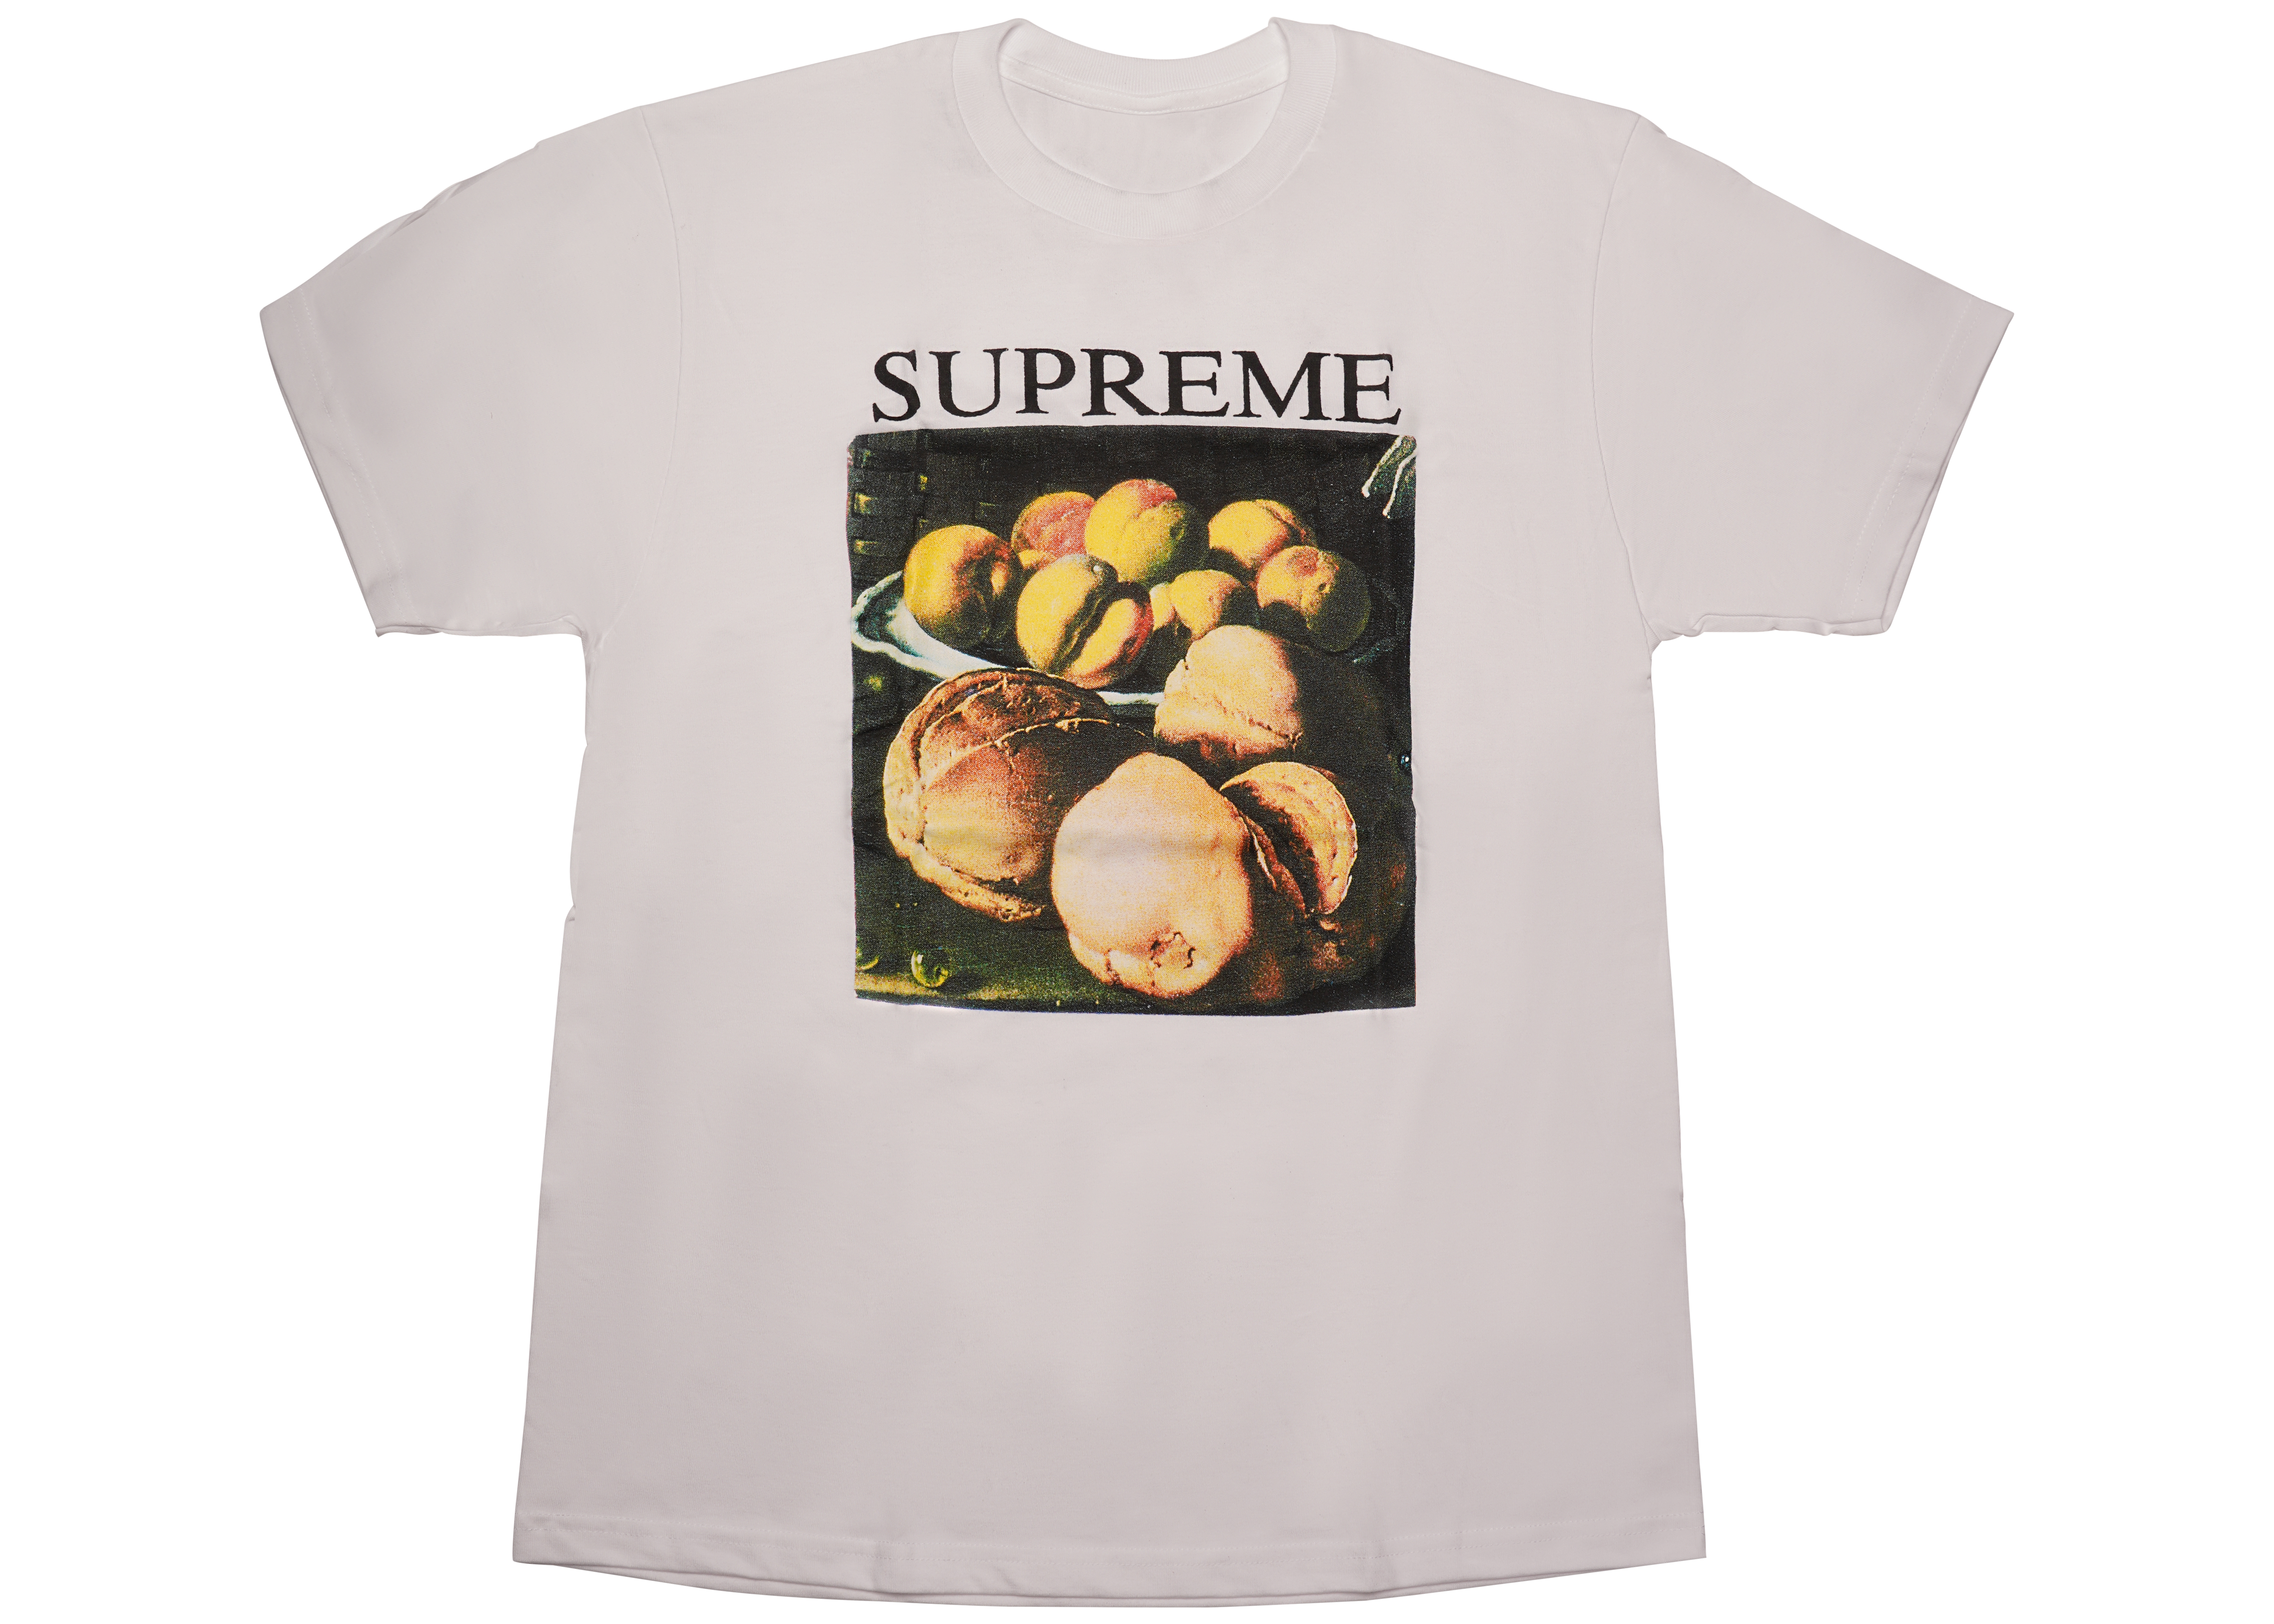 supreme shirt meaning